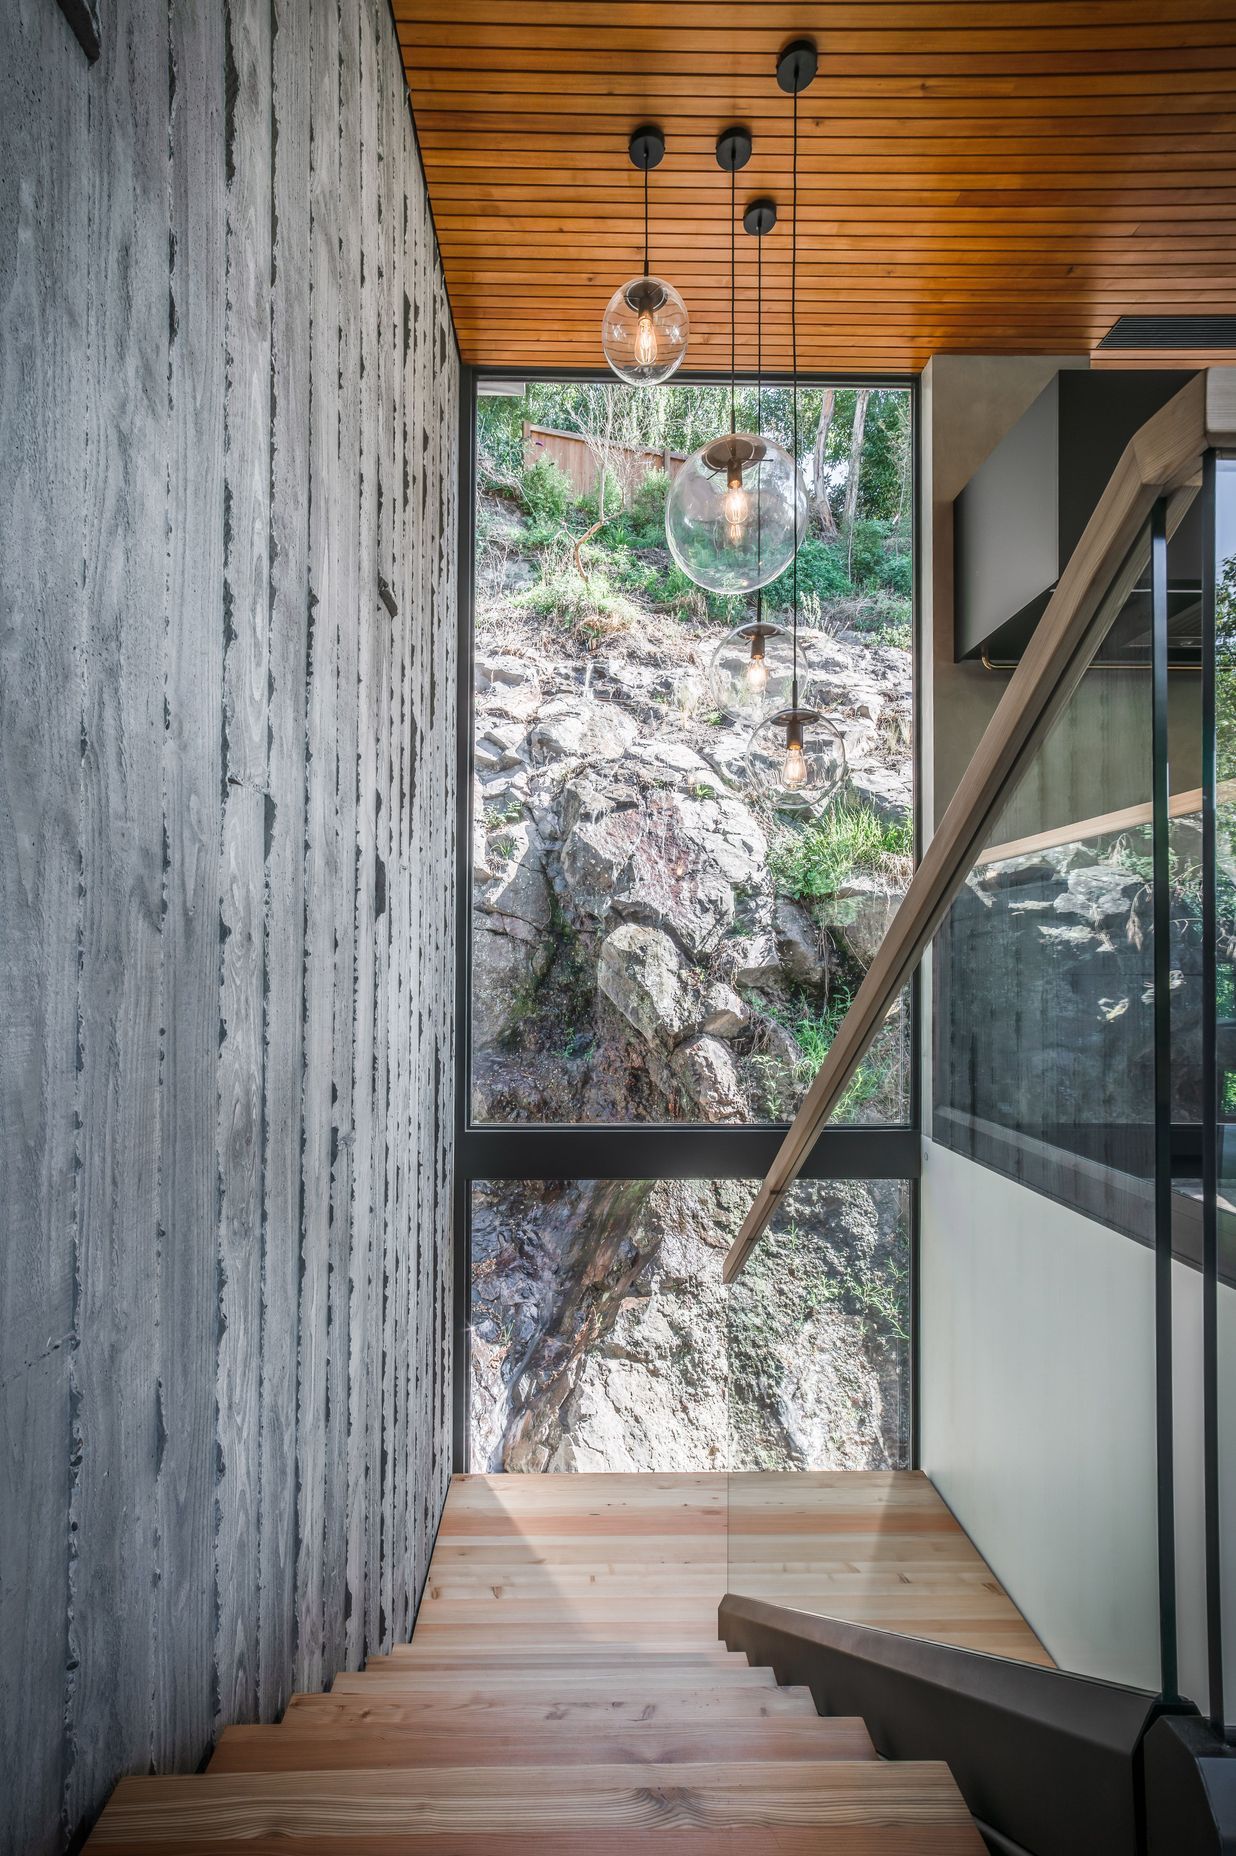 Here, double height glazing offers a confronting view of the rugged cliff face that defines the site.